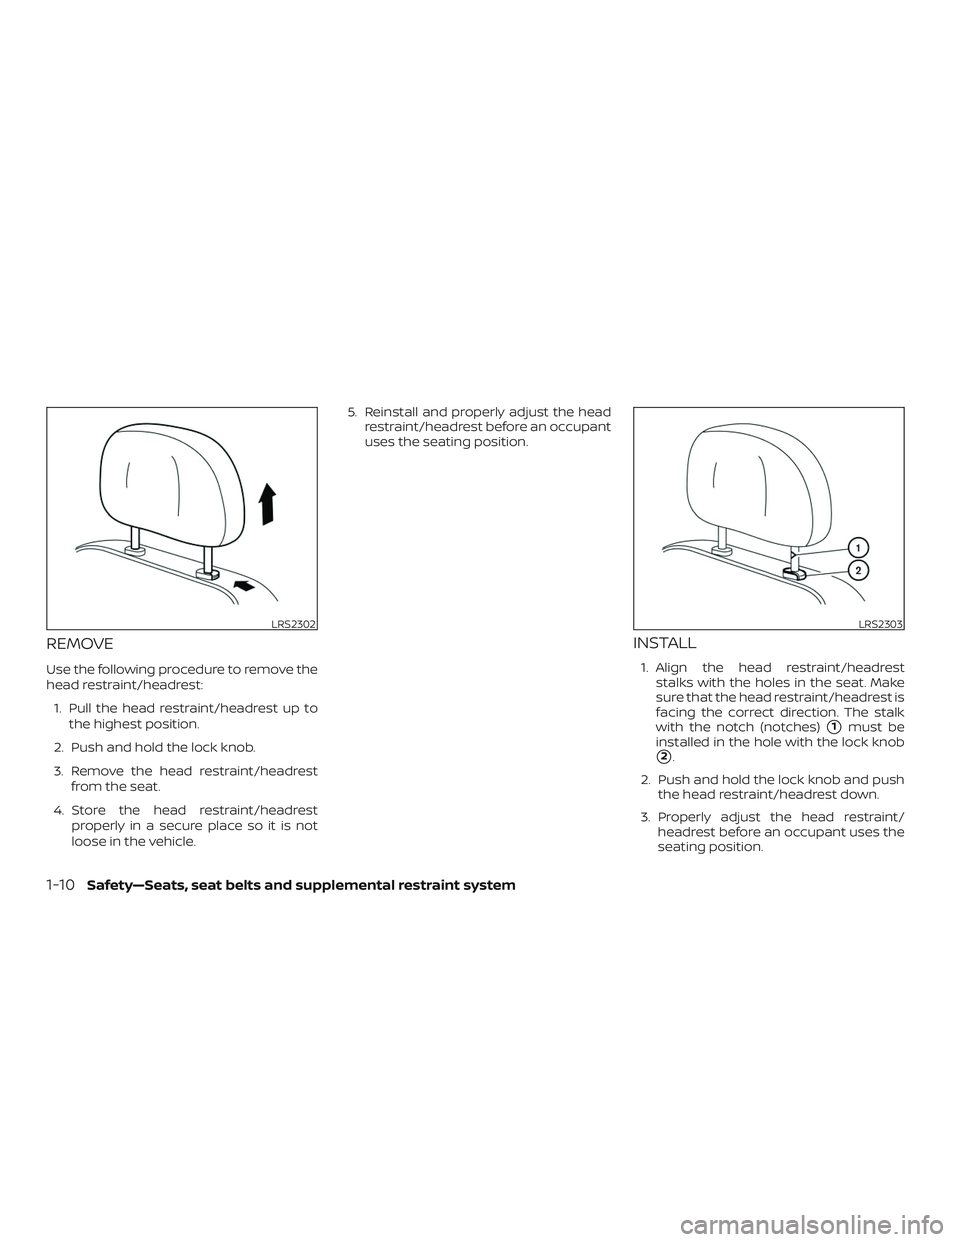 NISSAN ROGUE 2020  Owner´s Manual REMOVE
Use the following procedure to remove the
head restraint/headrest:1. Pull the head restraint/headrest up to the highest position.
2. Push and hold the lock knob.
3. Remove the head restraint/he